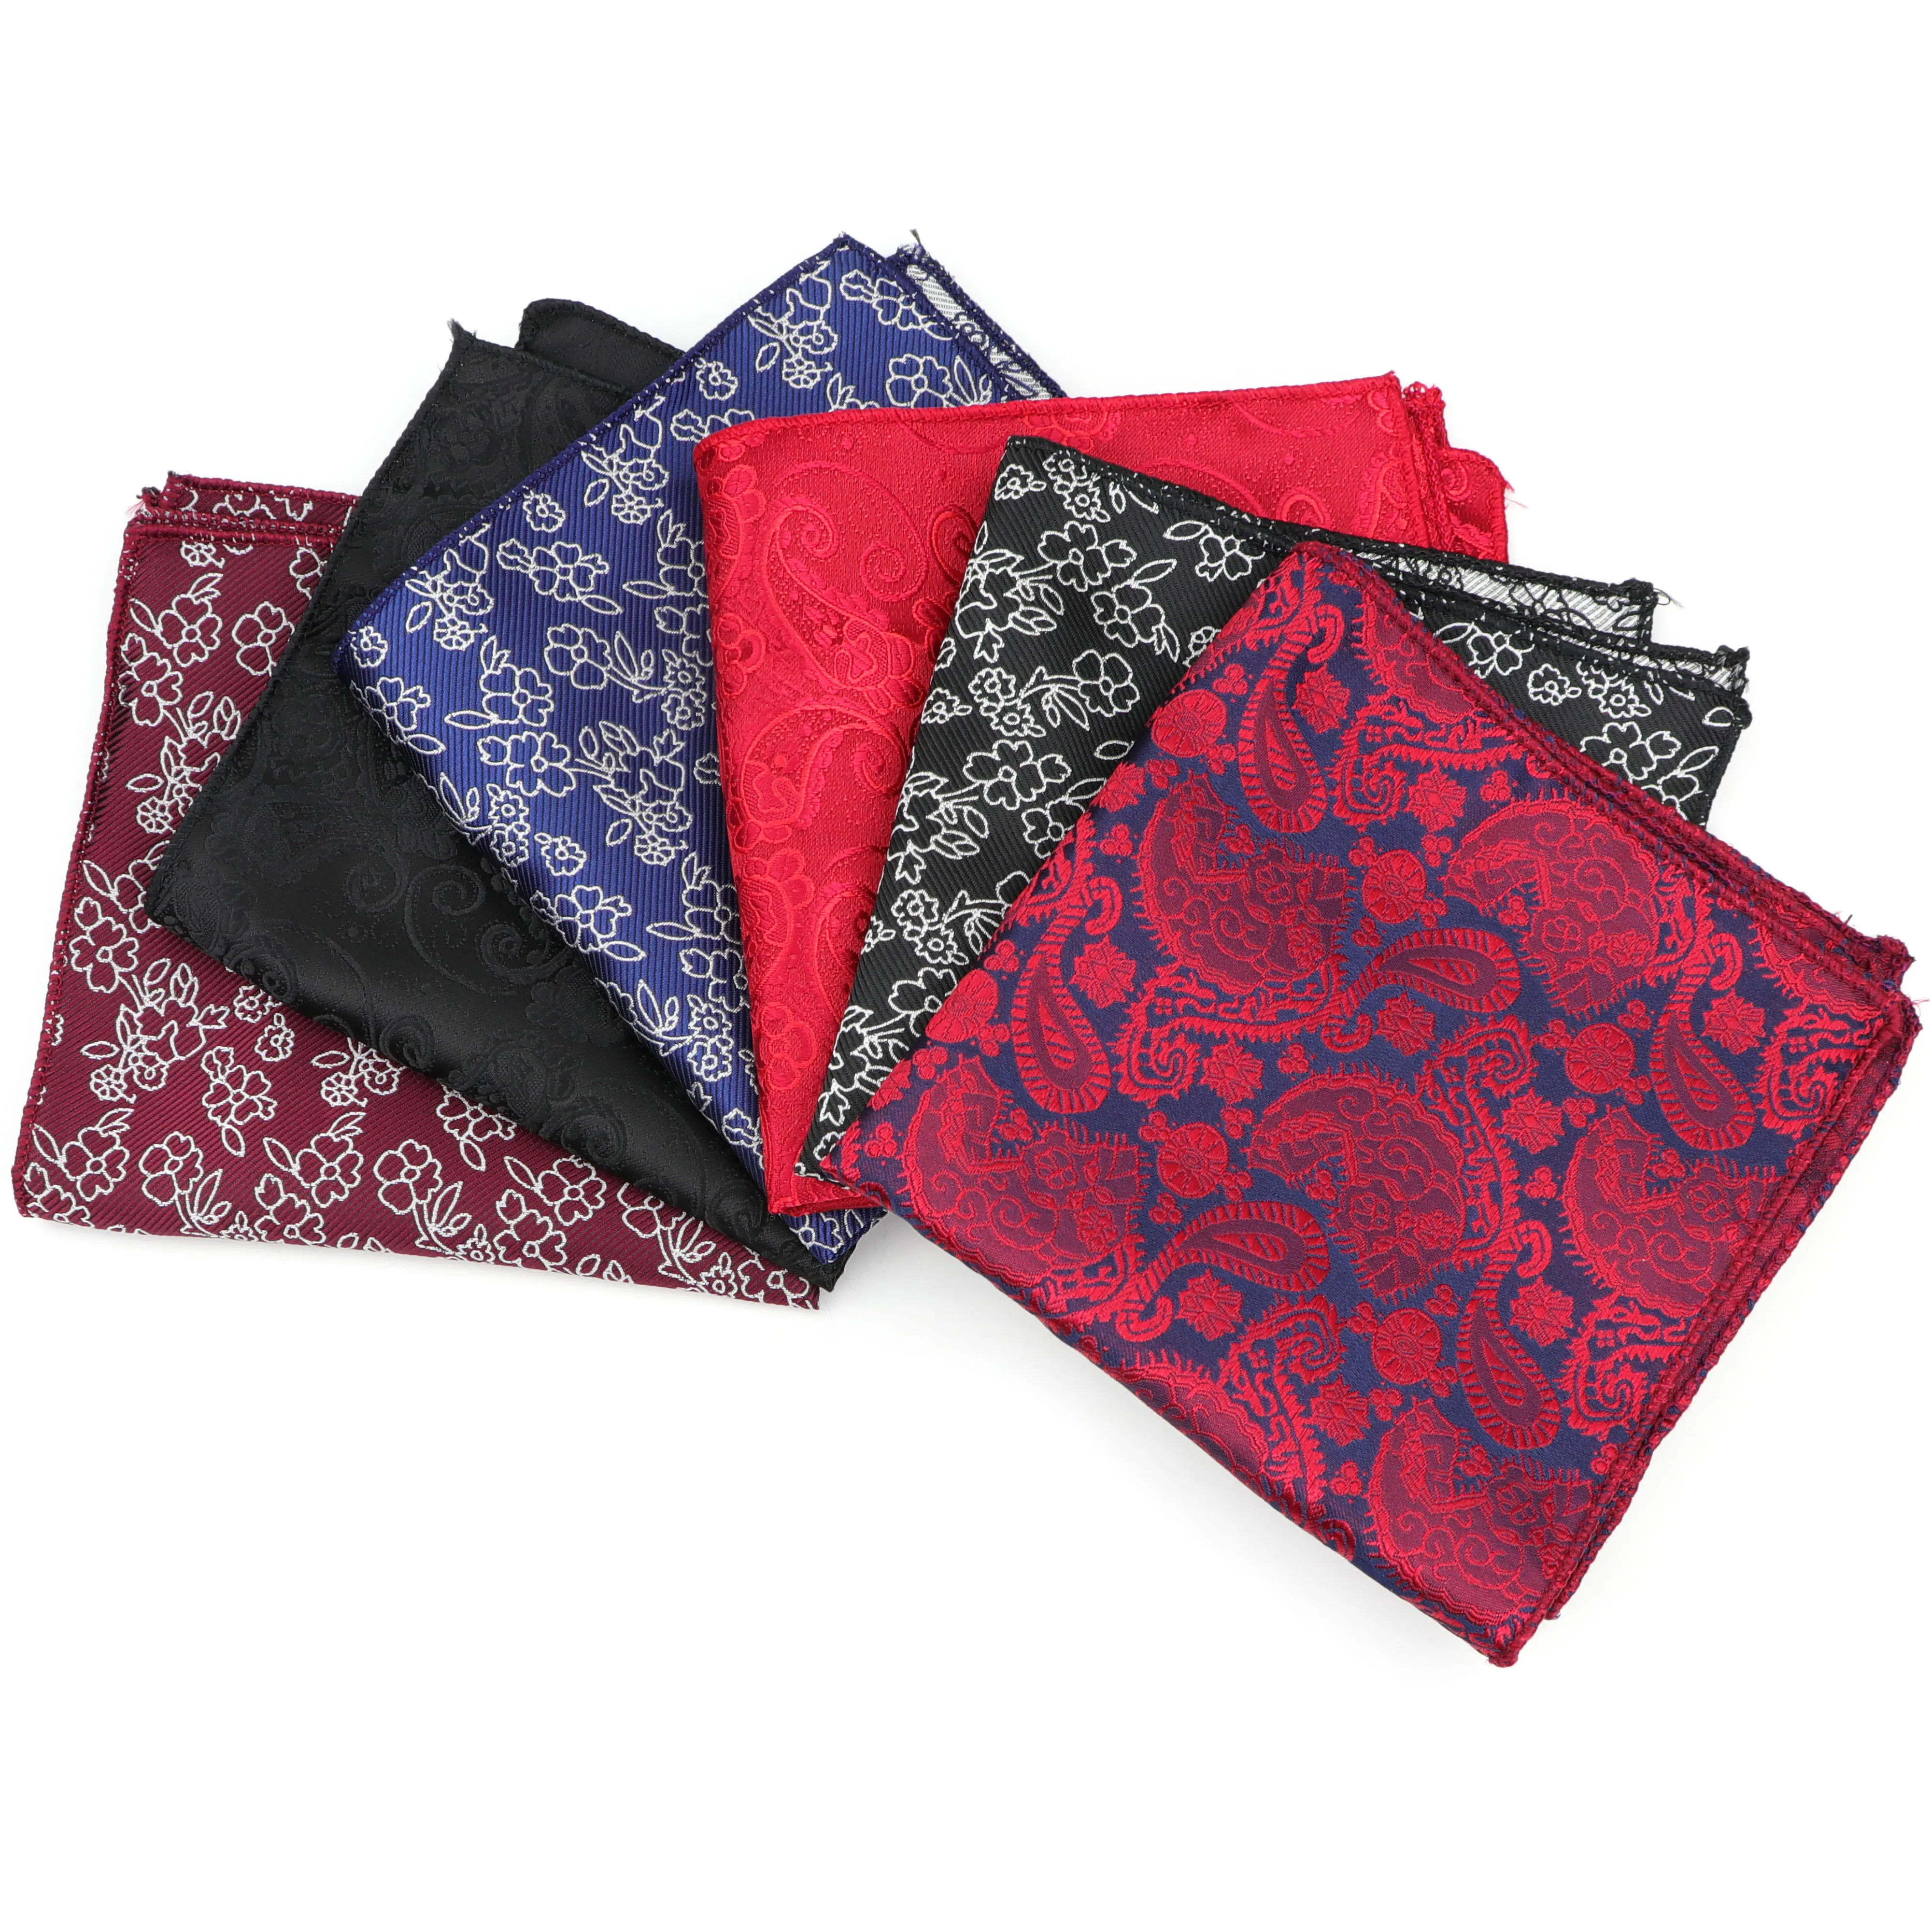 

Men's Polyester Handkerchief Hanky Man Paisley Floral Jacquard Woven Pocket Square 23*23cm For Business Wedding Party